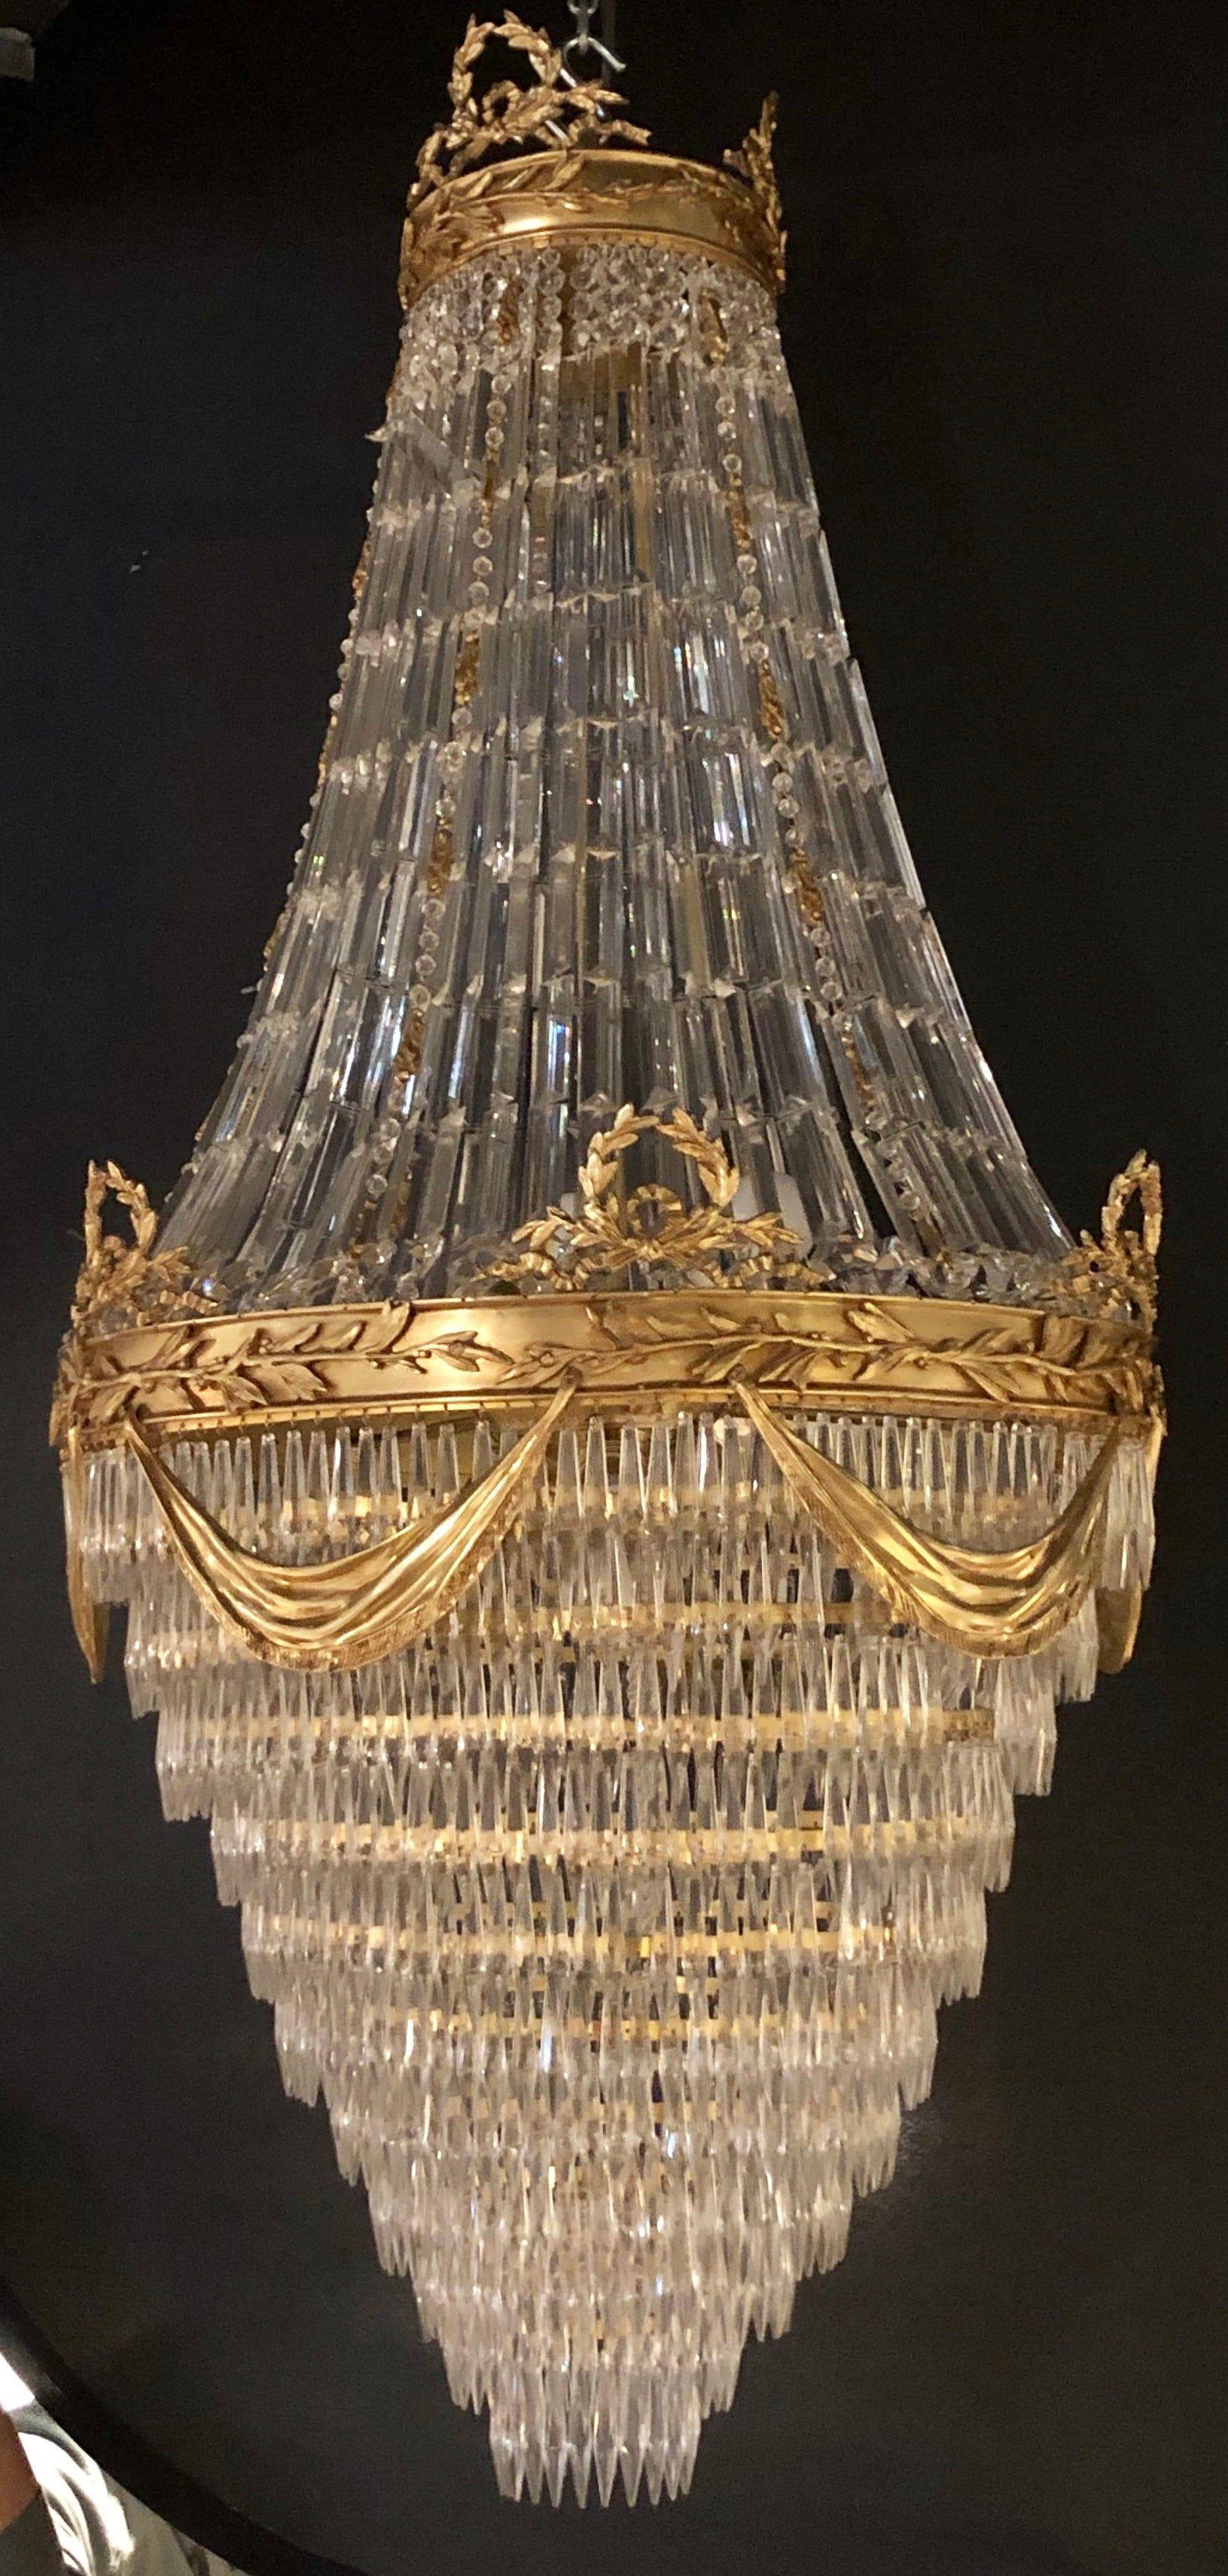 Pair of spectacular palatial crystal swag design Louis XVI style chandeliers in bronze having a floral and swag with drapery form design. These large and impressive chandeliers have been recently rewired and are ready to hang in any palace befitting